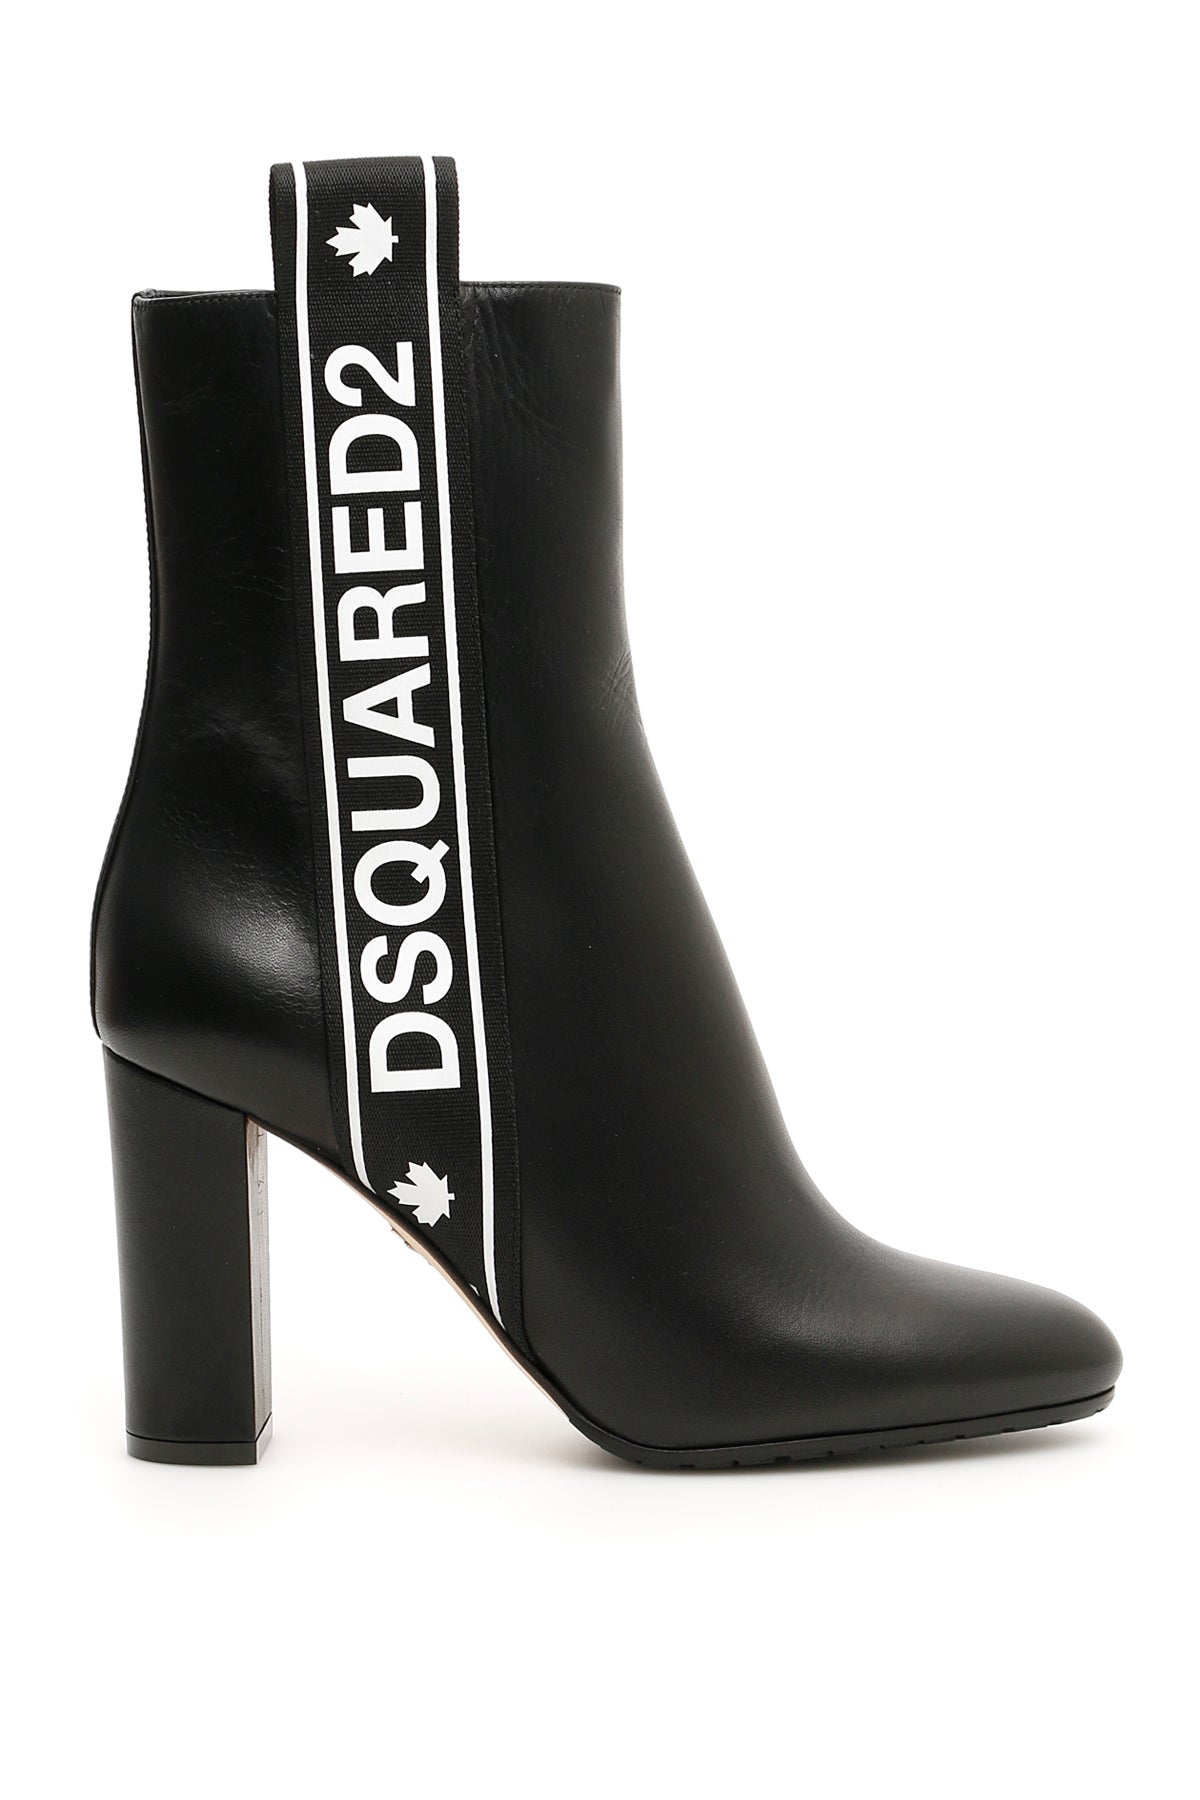 DSQUARED2 DSQUARED2 LOGO ANKLE BOOTS